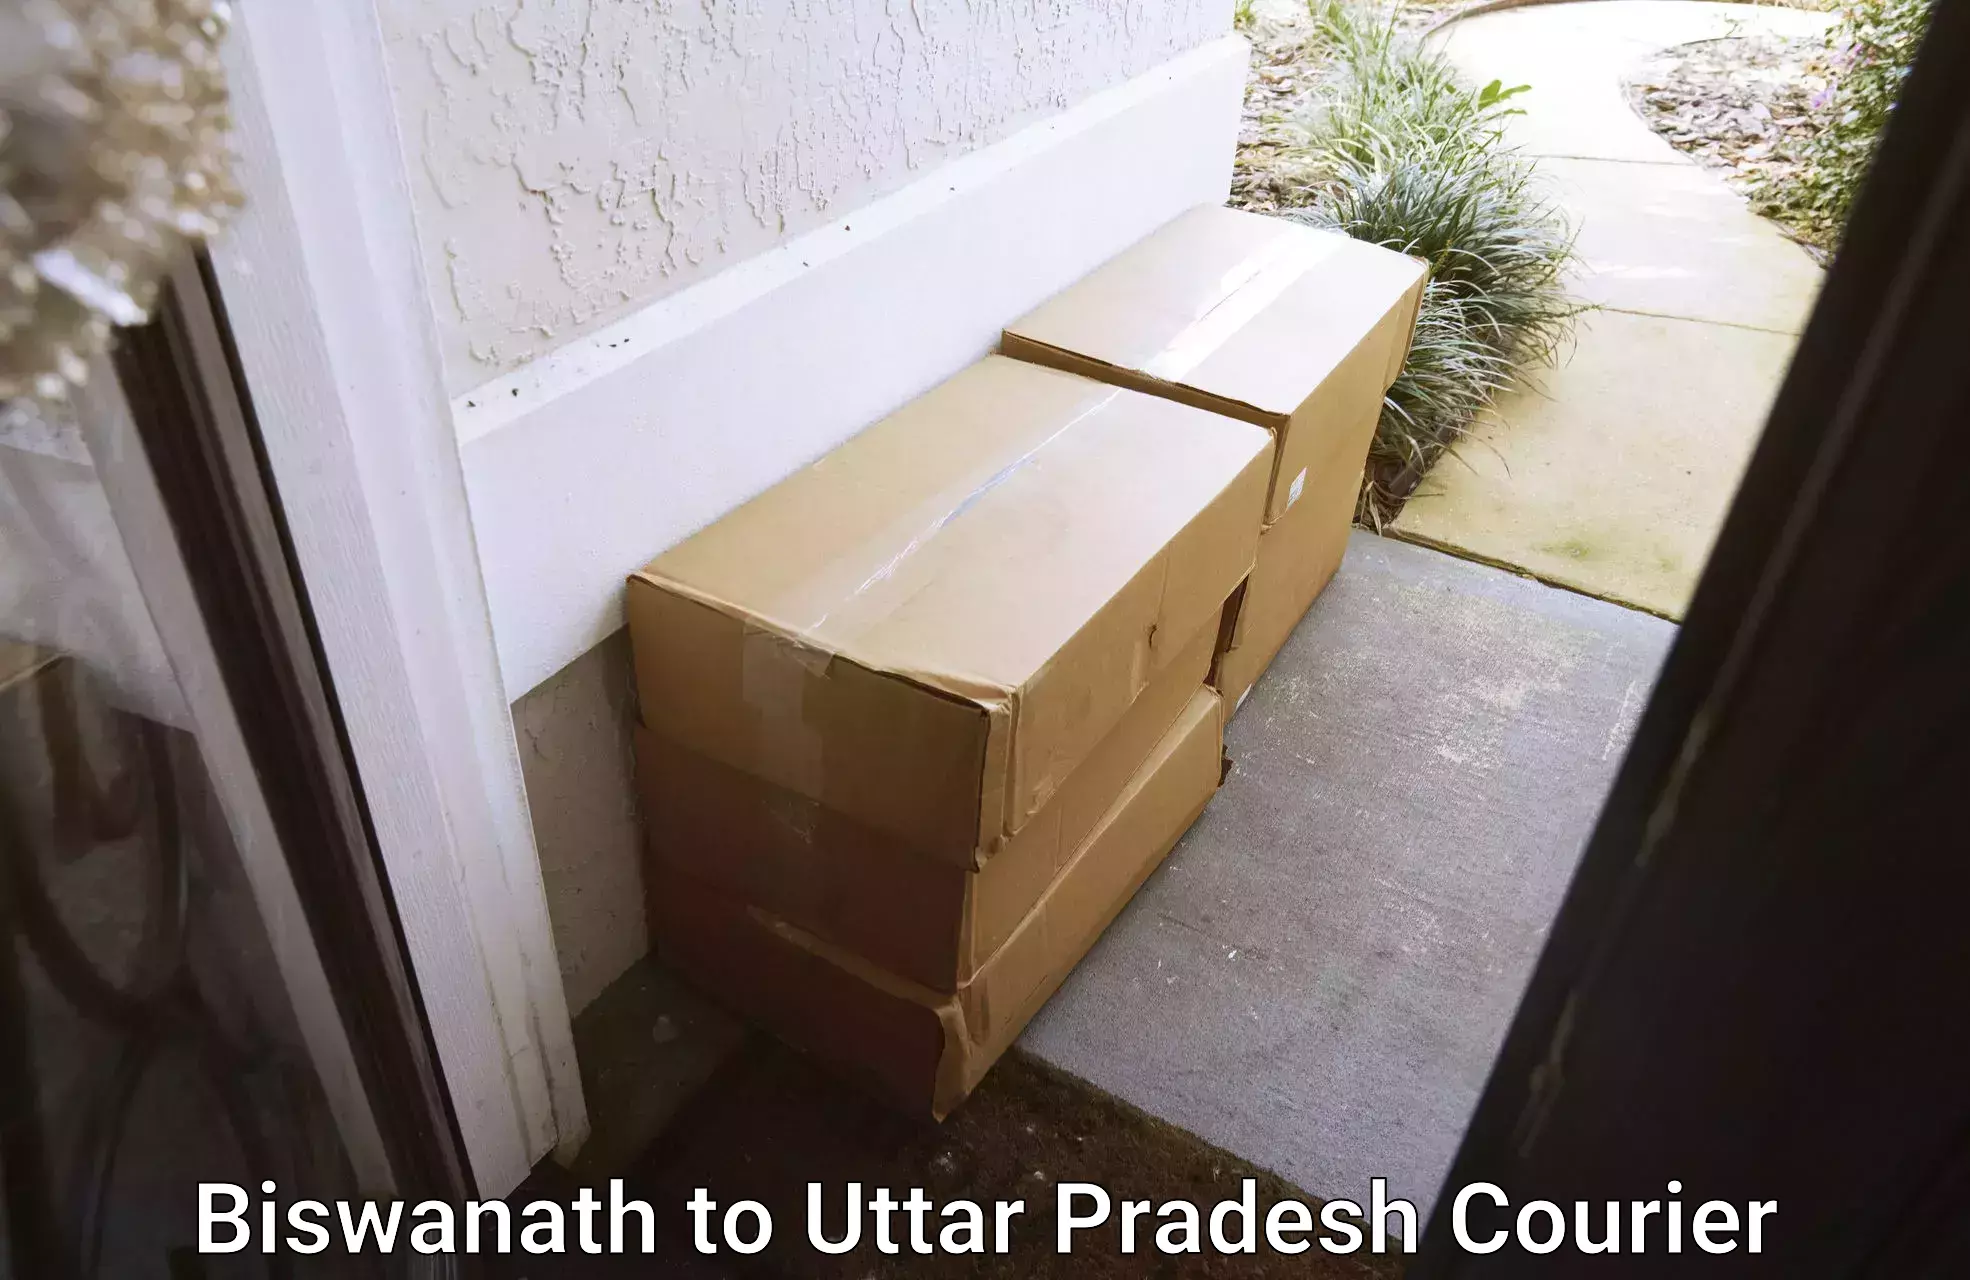 Multi-service courier options Biswanath to Ratanpura